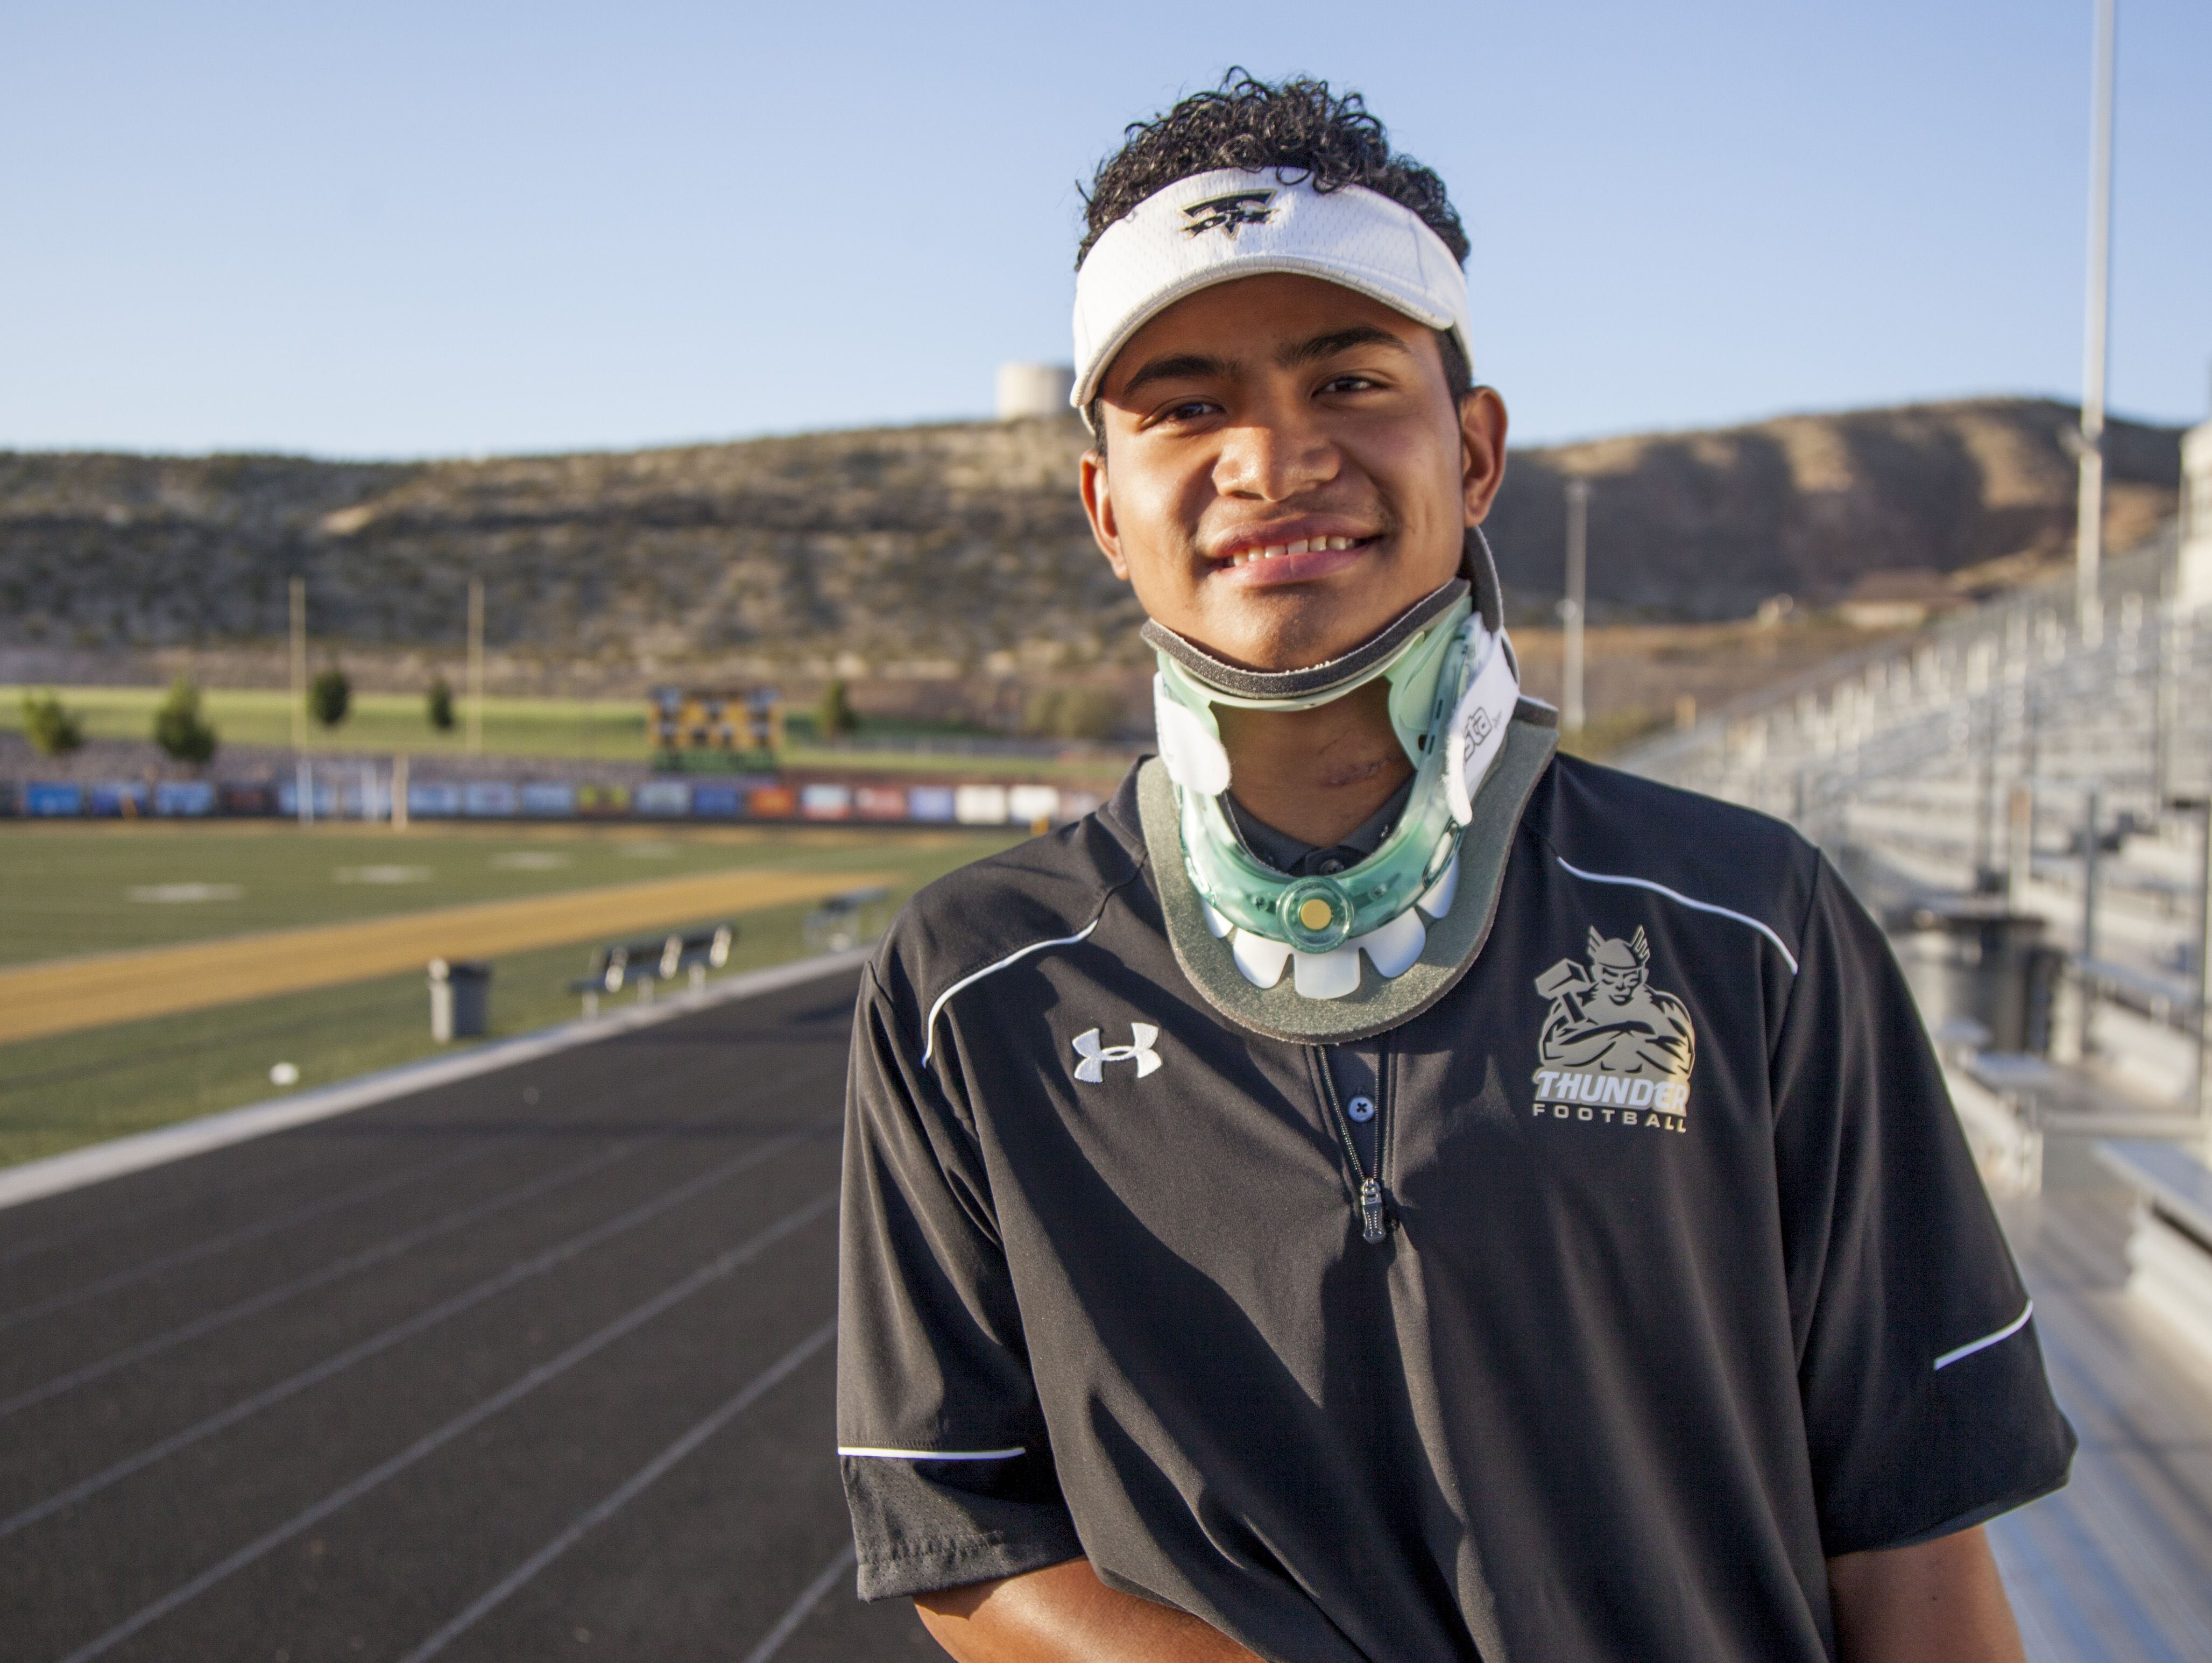 Desert Hills' Nephi Sewell begins the long road to recovery after his season was cut short by a spinal injury sustained during their game against Jordan High. Friday, Sept. 4, 2015.